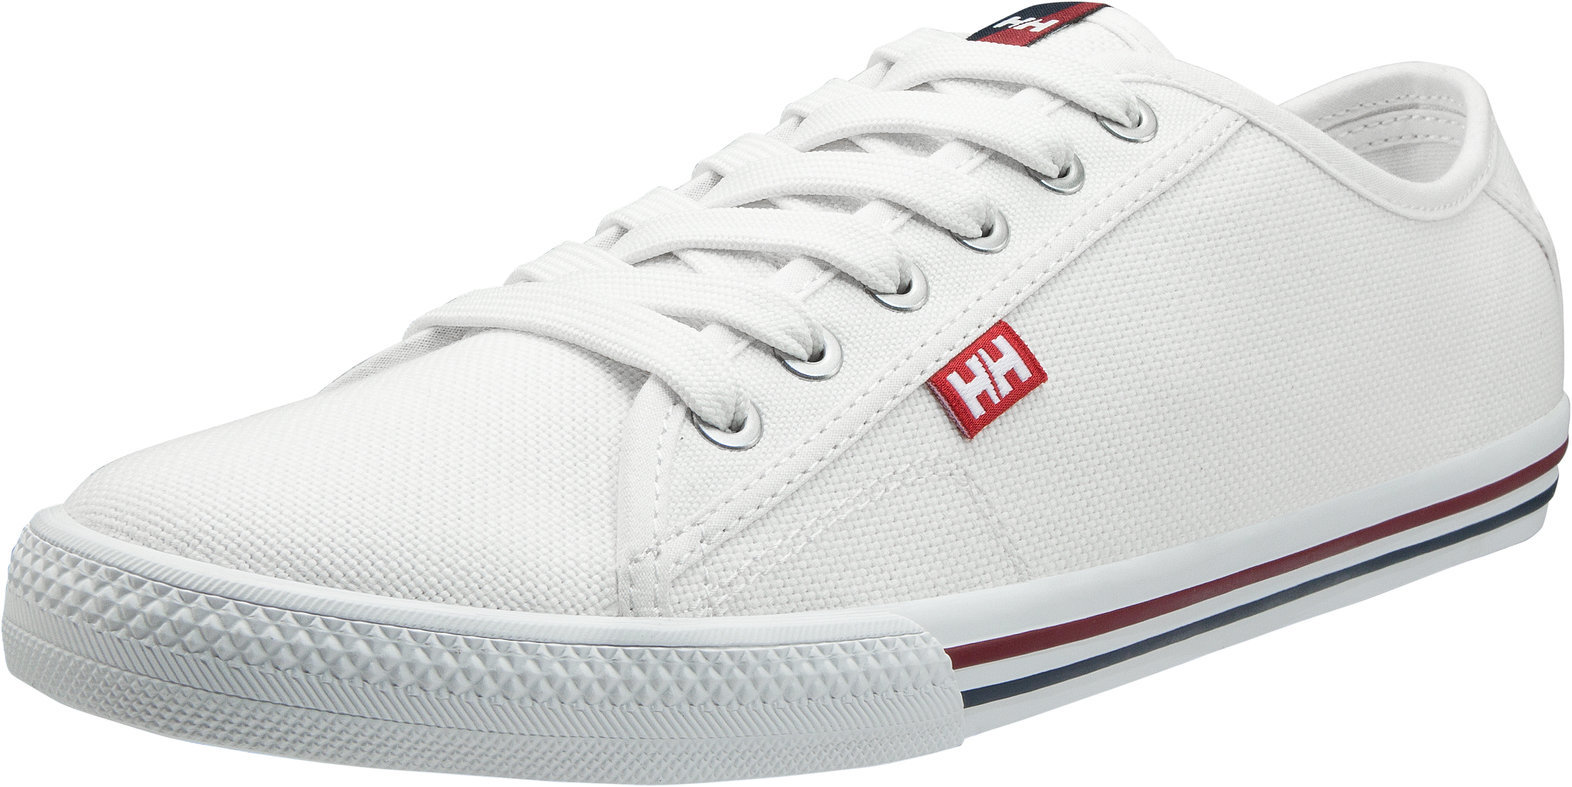 Mens Sailing Shoes Helly Hansen FJORD CANVAS OFF WHITE 42,5